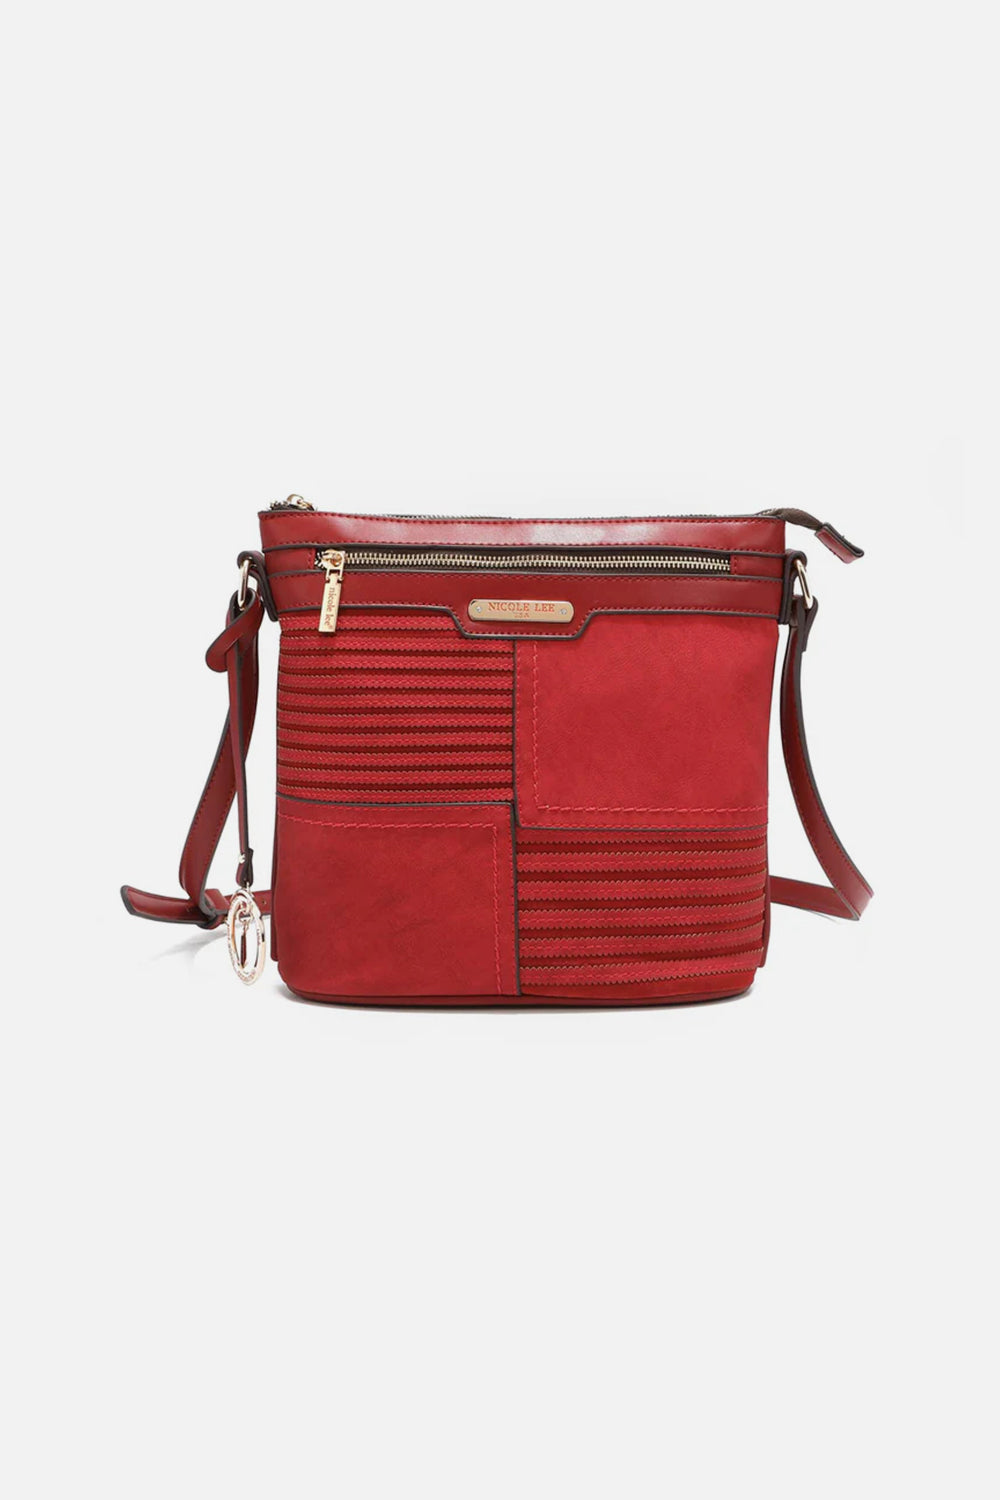 Nicole Lee USA Scallop Stitched Crossbody Bag RED or BLACK